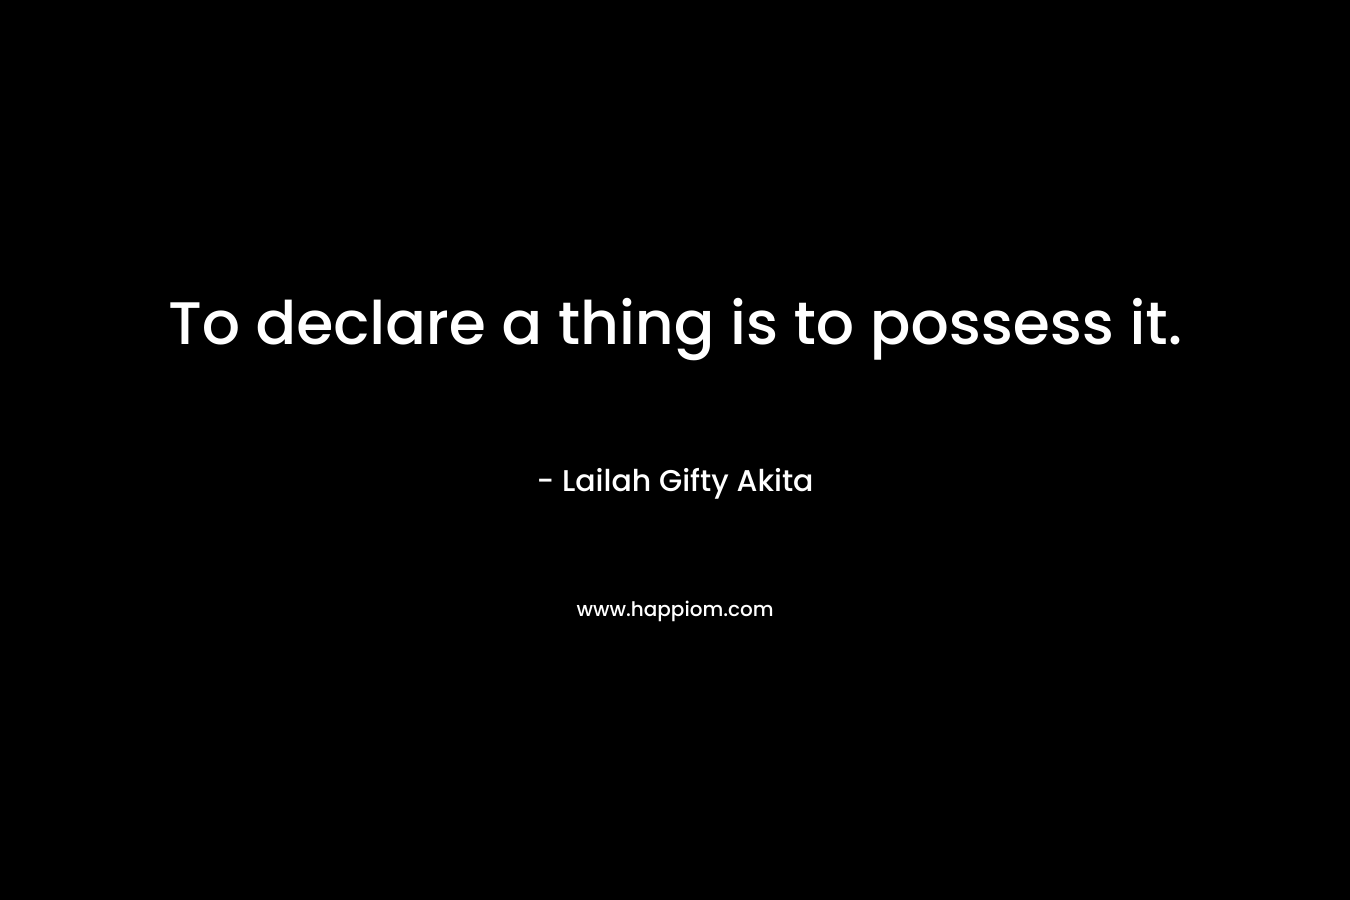 To declare a thing is to possess it.